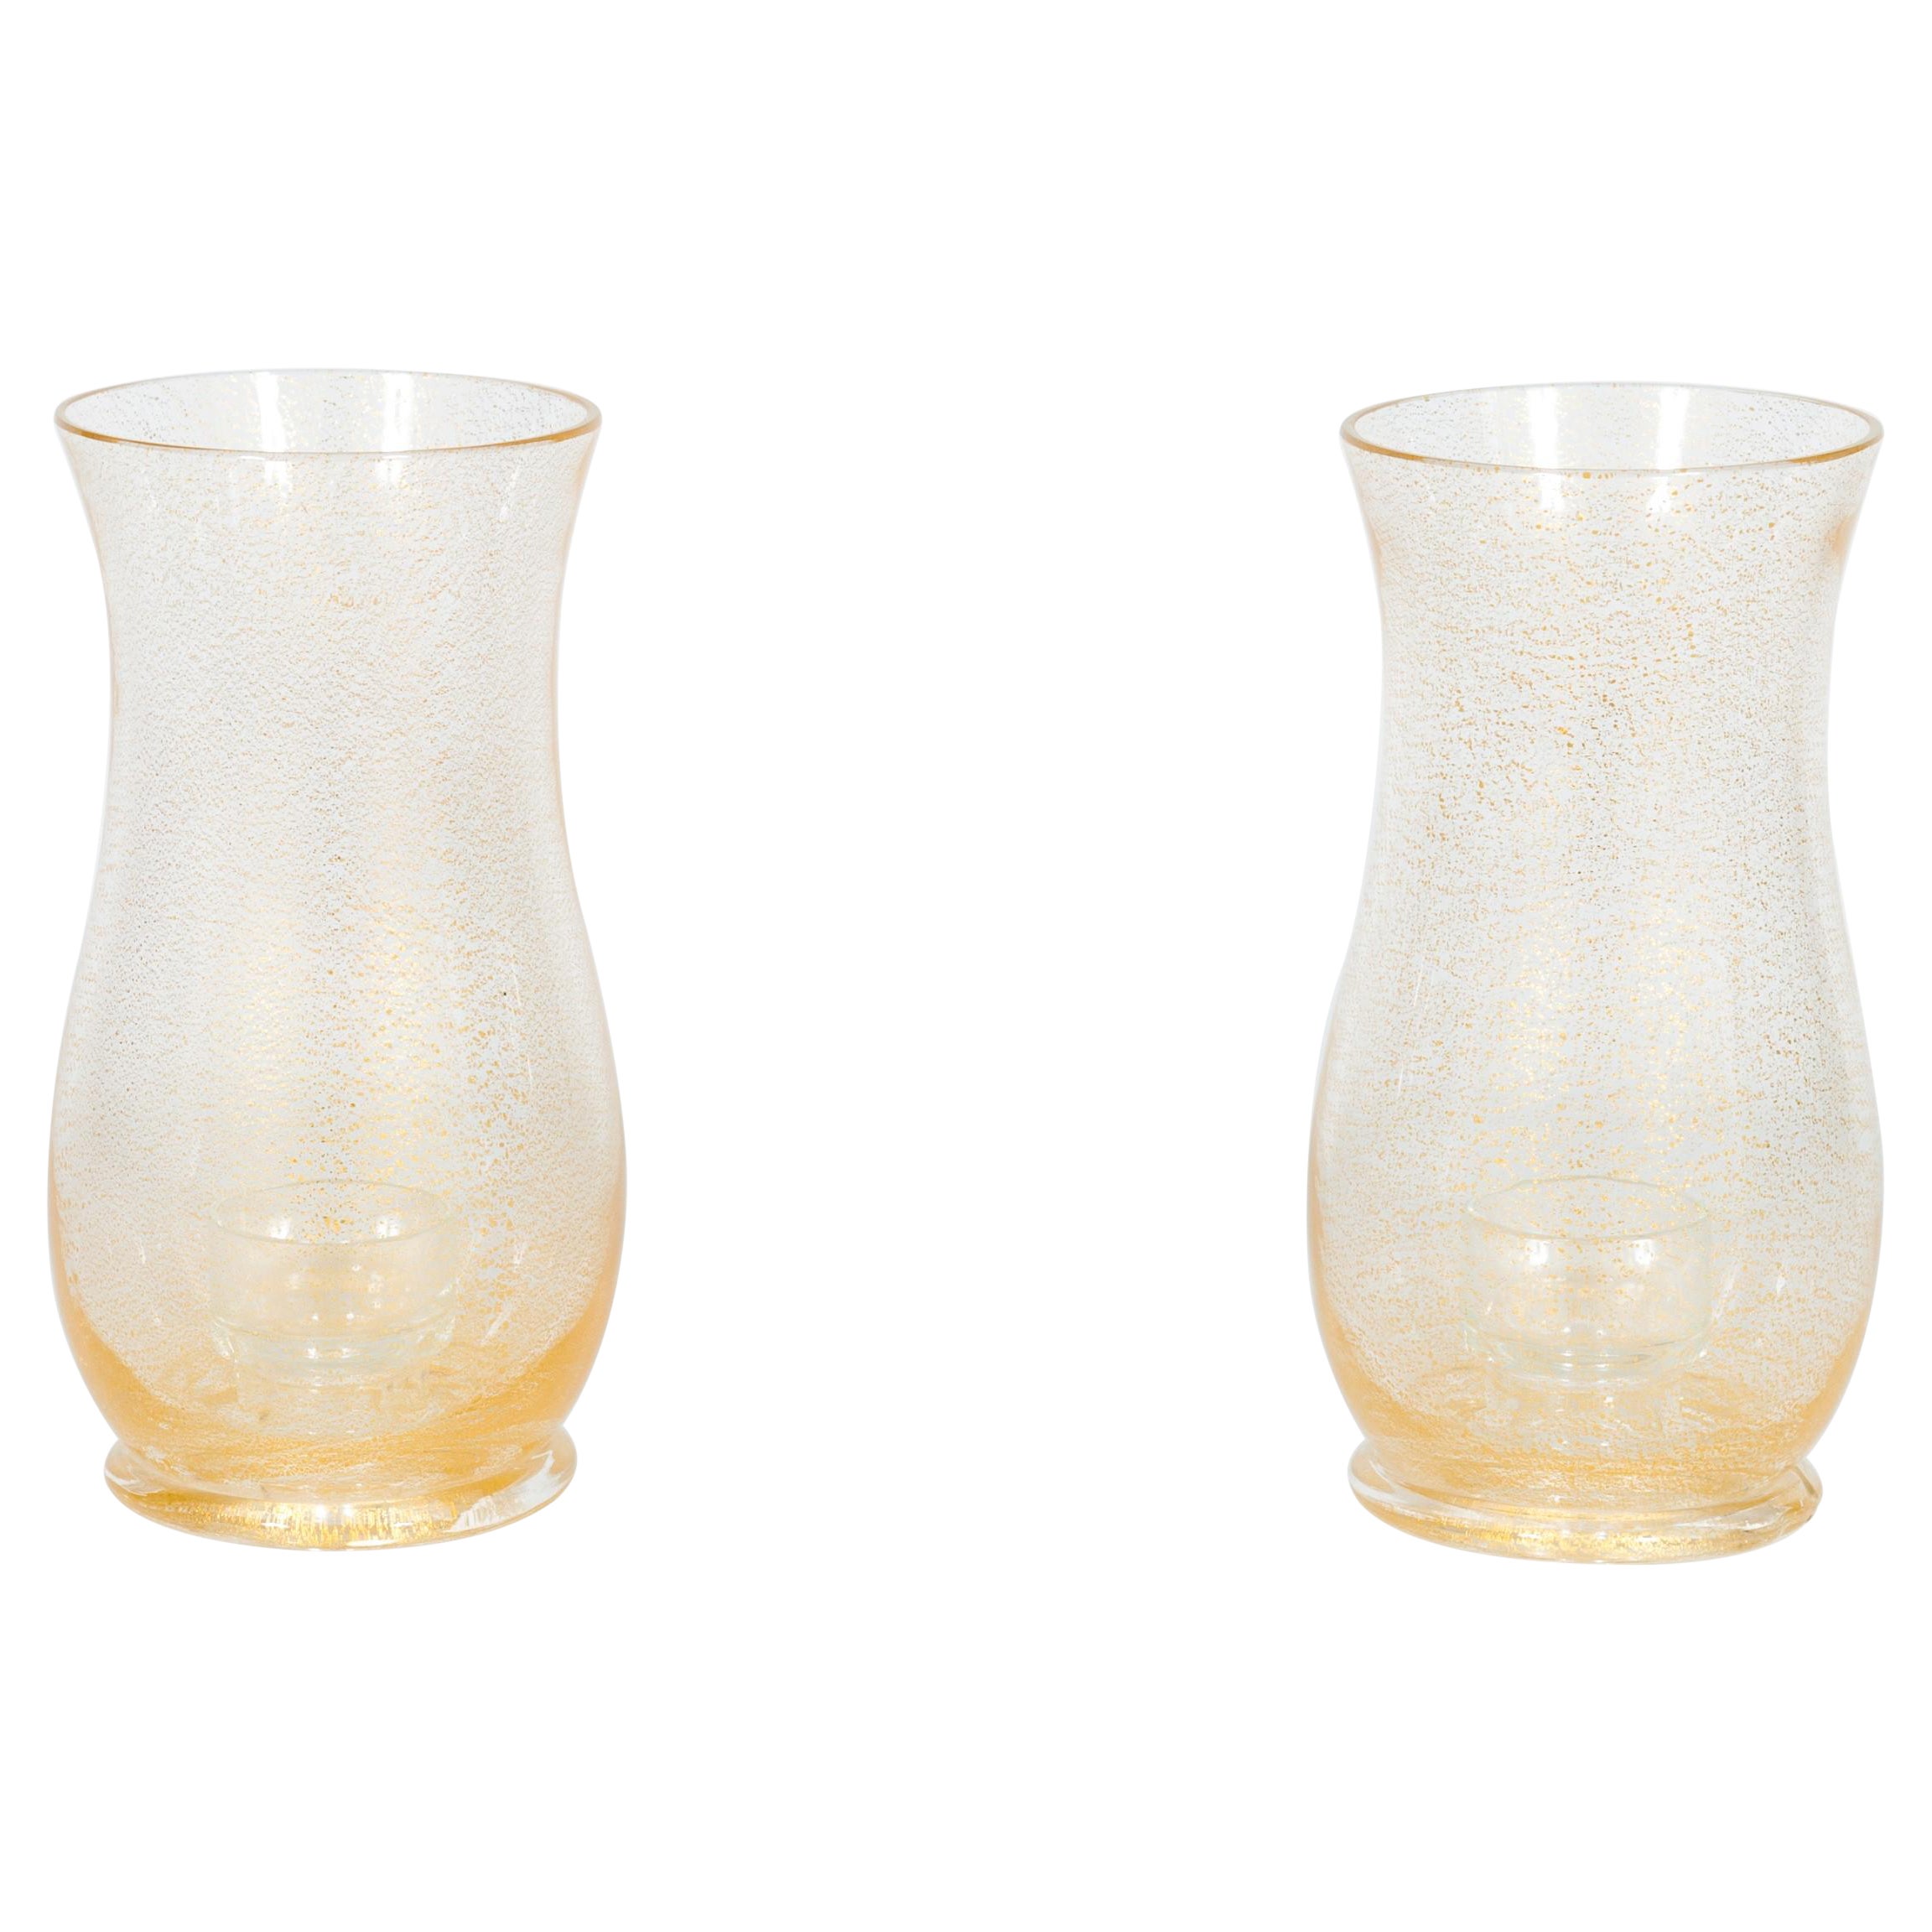 Pair of Murano Glass Candle Holders with Submerged Gold, Attributed to Striulli For Sale